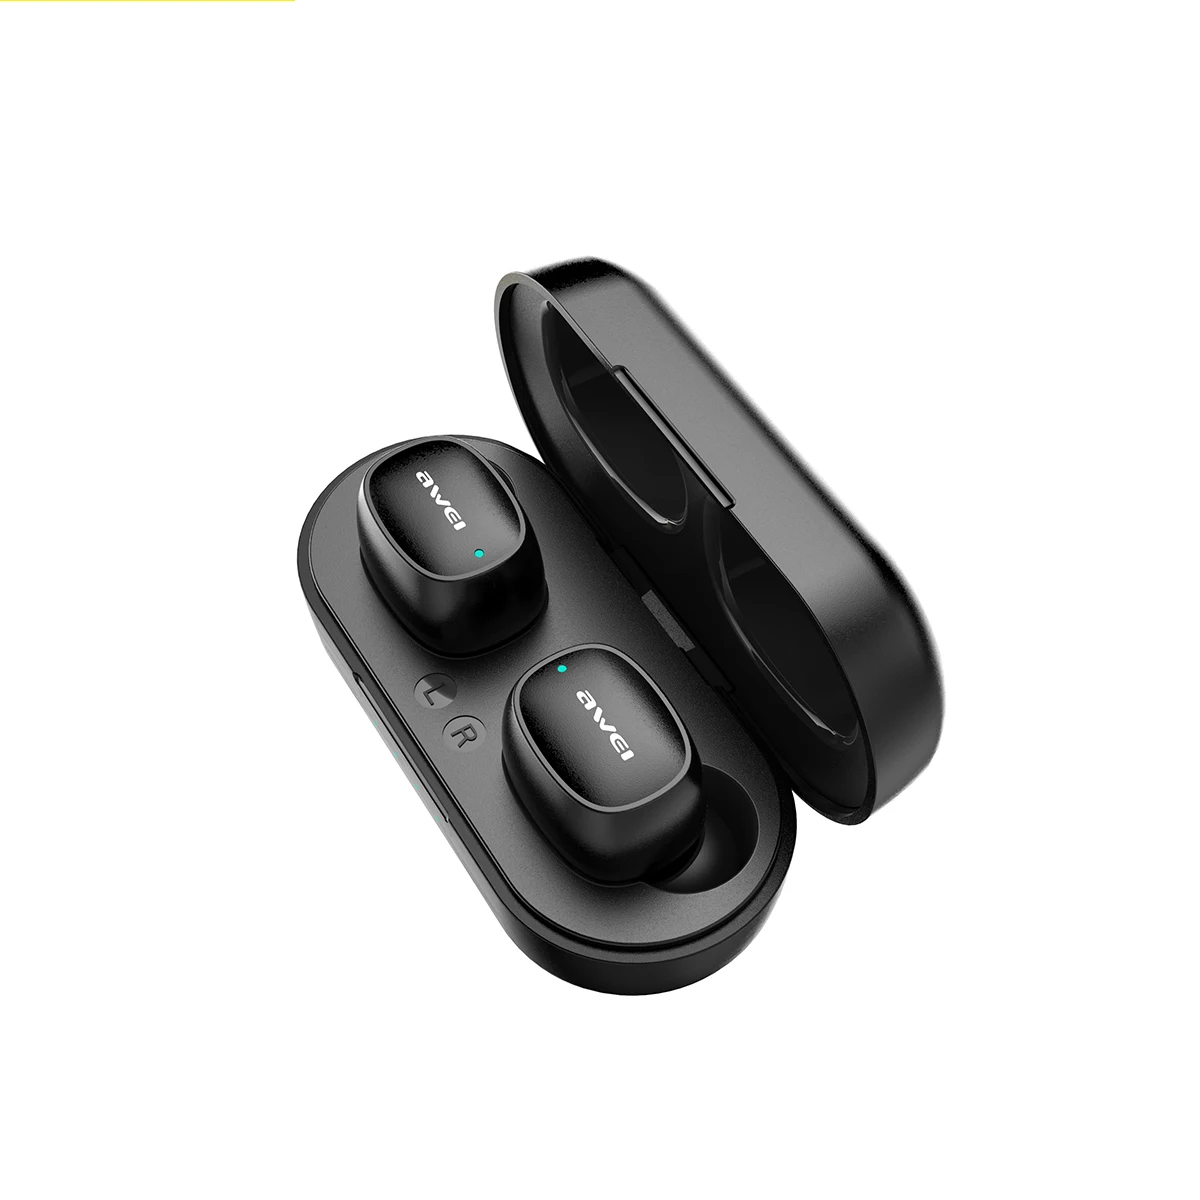 AWEI Newest T13 TWS Earbuds Earphone with Charging Case Hot selling